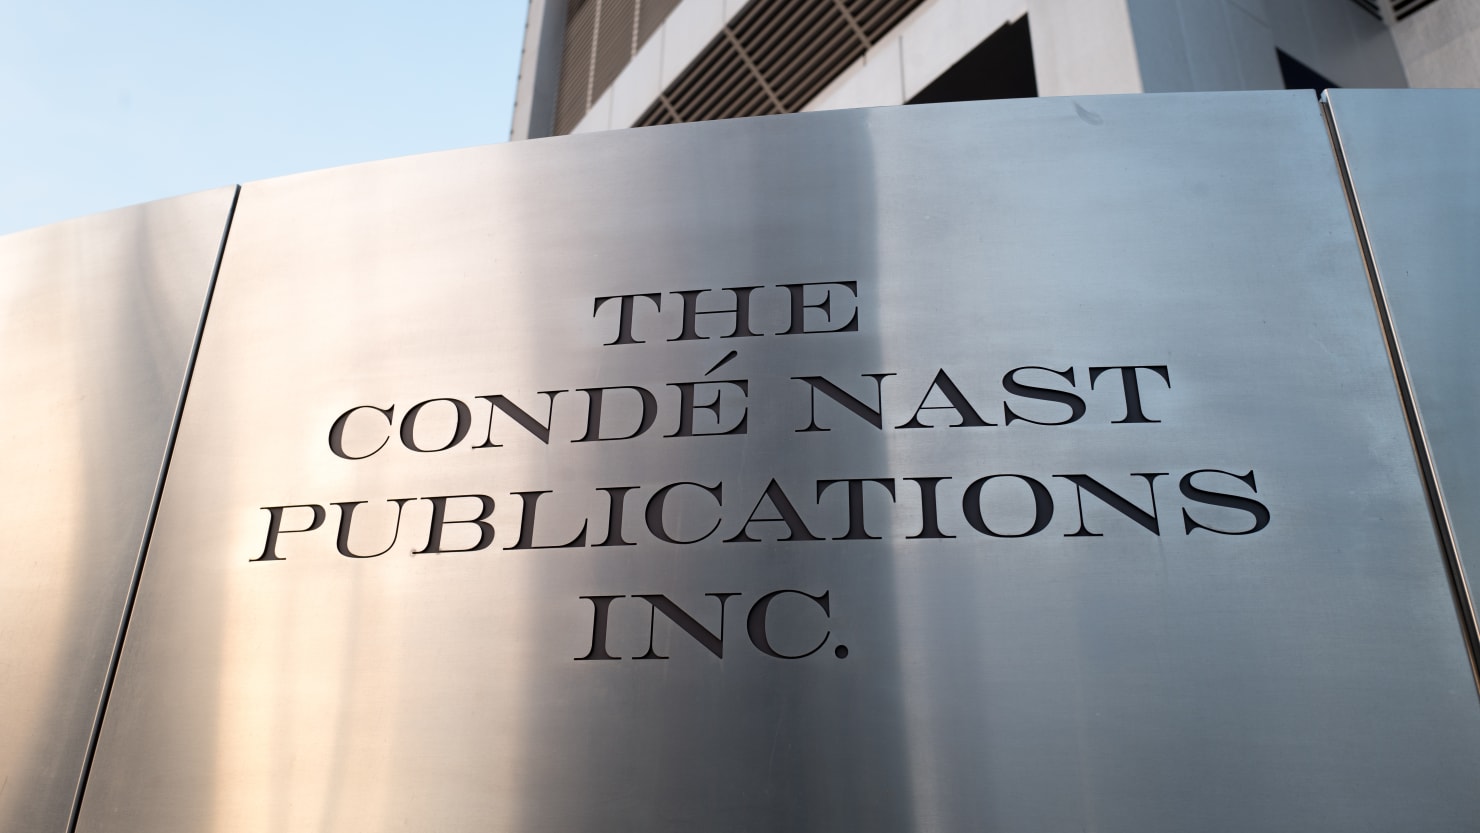 Black Analyst Says Condé Nast Used Bogus Stolen Oatmeal Claim to Fire Him